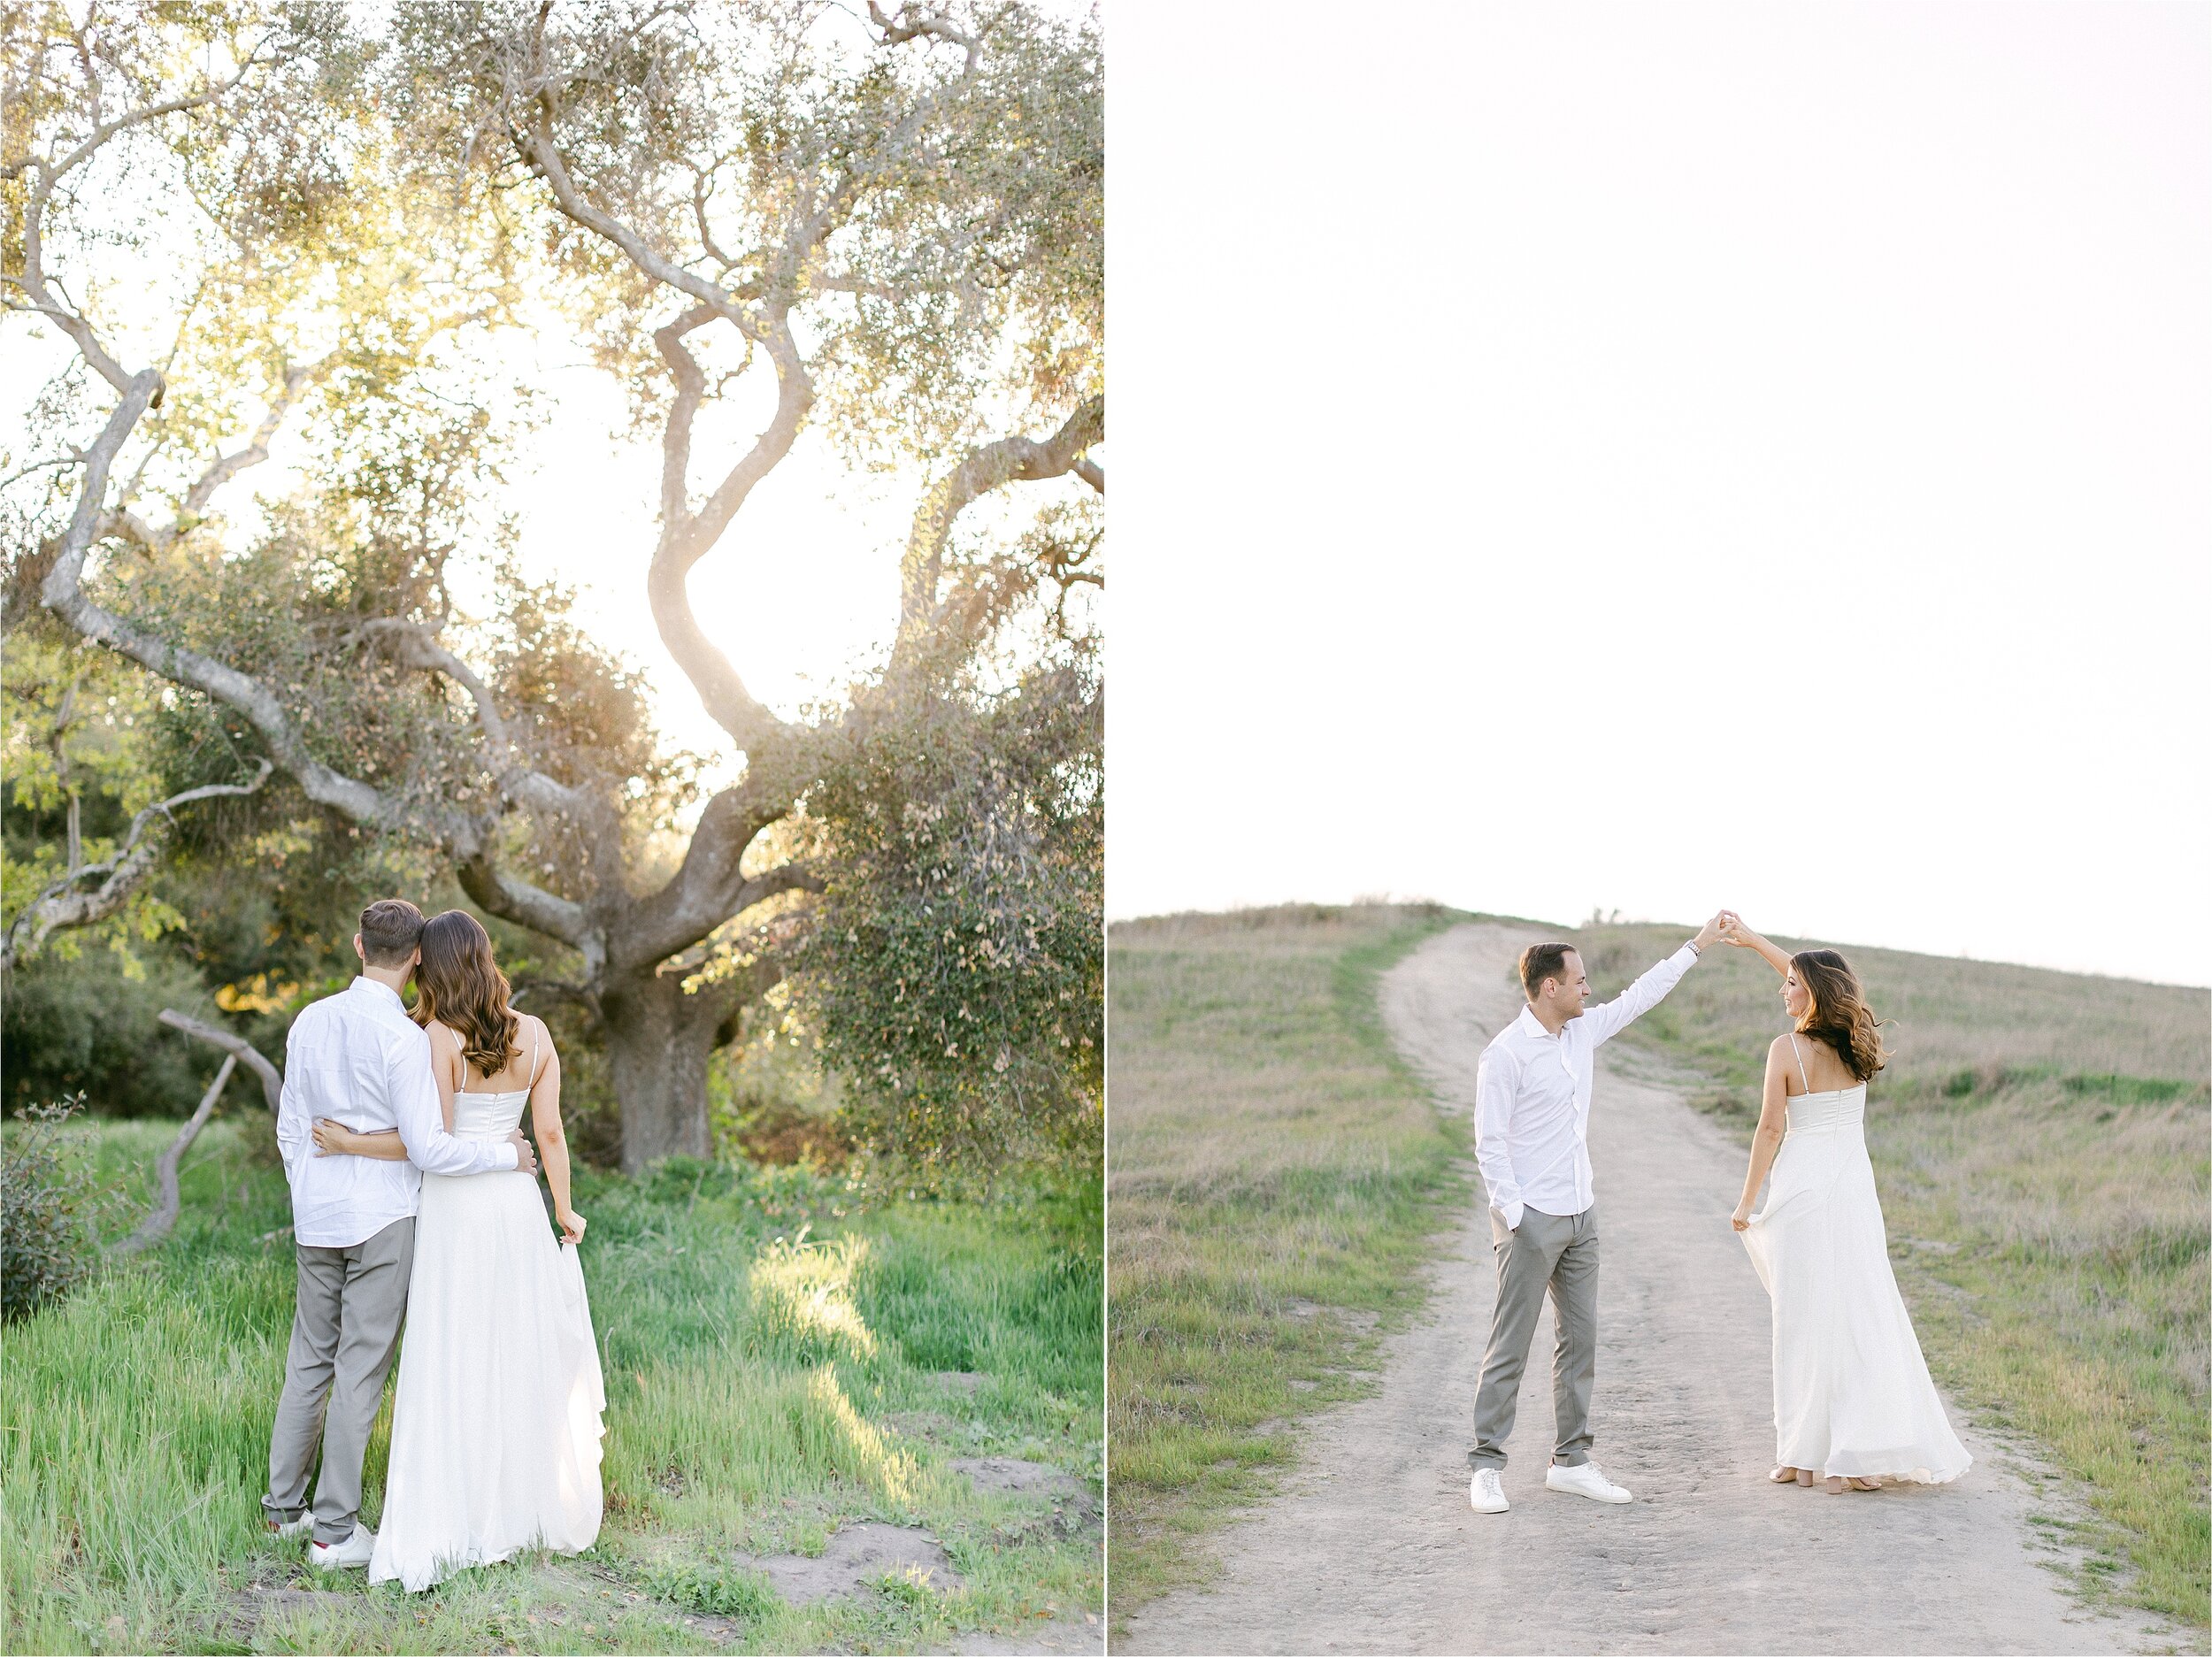 Bride and Groom-to-be hug under large oak tree during their engagement photos in Orange County, CA.